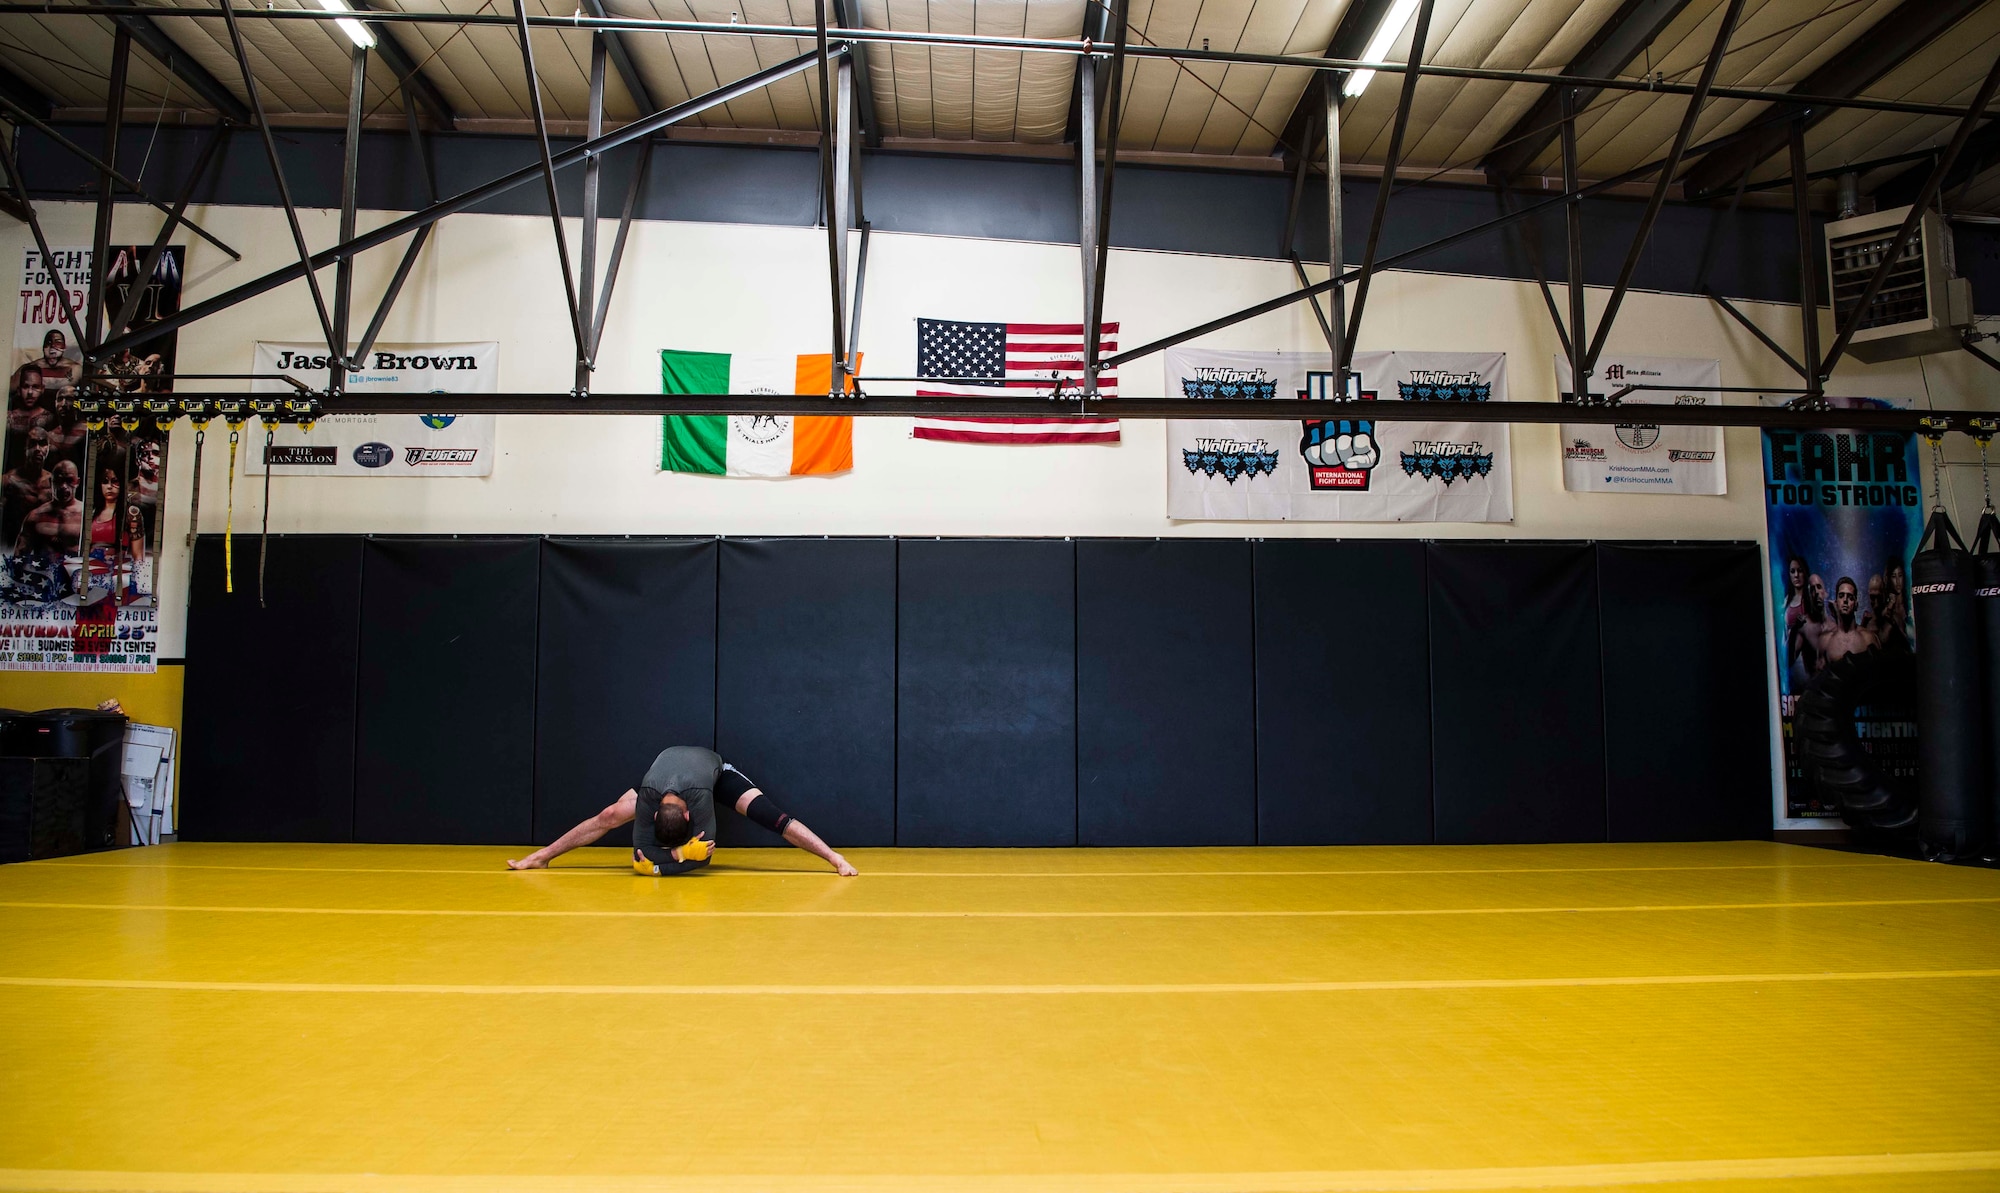 Airman 1st Class Raul Veliz, 90th Missile Security Forces Squadron response force leader, stretches before training at Trials Mixed Martial Arts gym in Fort Collins, Colo., May 5, 2017. Veliz makes the hour trip to Colorado four days a week to train. He is stationed at F.E. Warren Air Force Base, Wyo. (U.S. Air Force photo by Staff Sgt. Christopher Ruano)